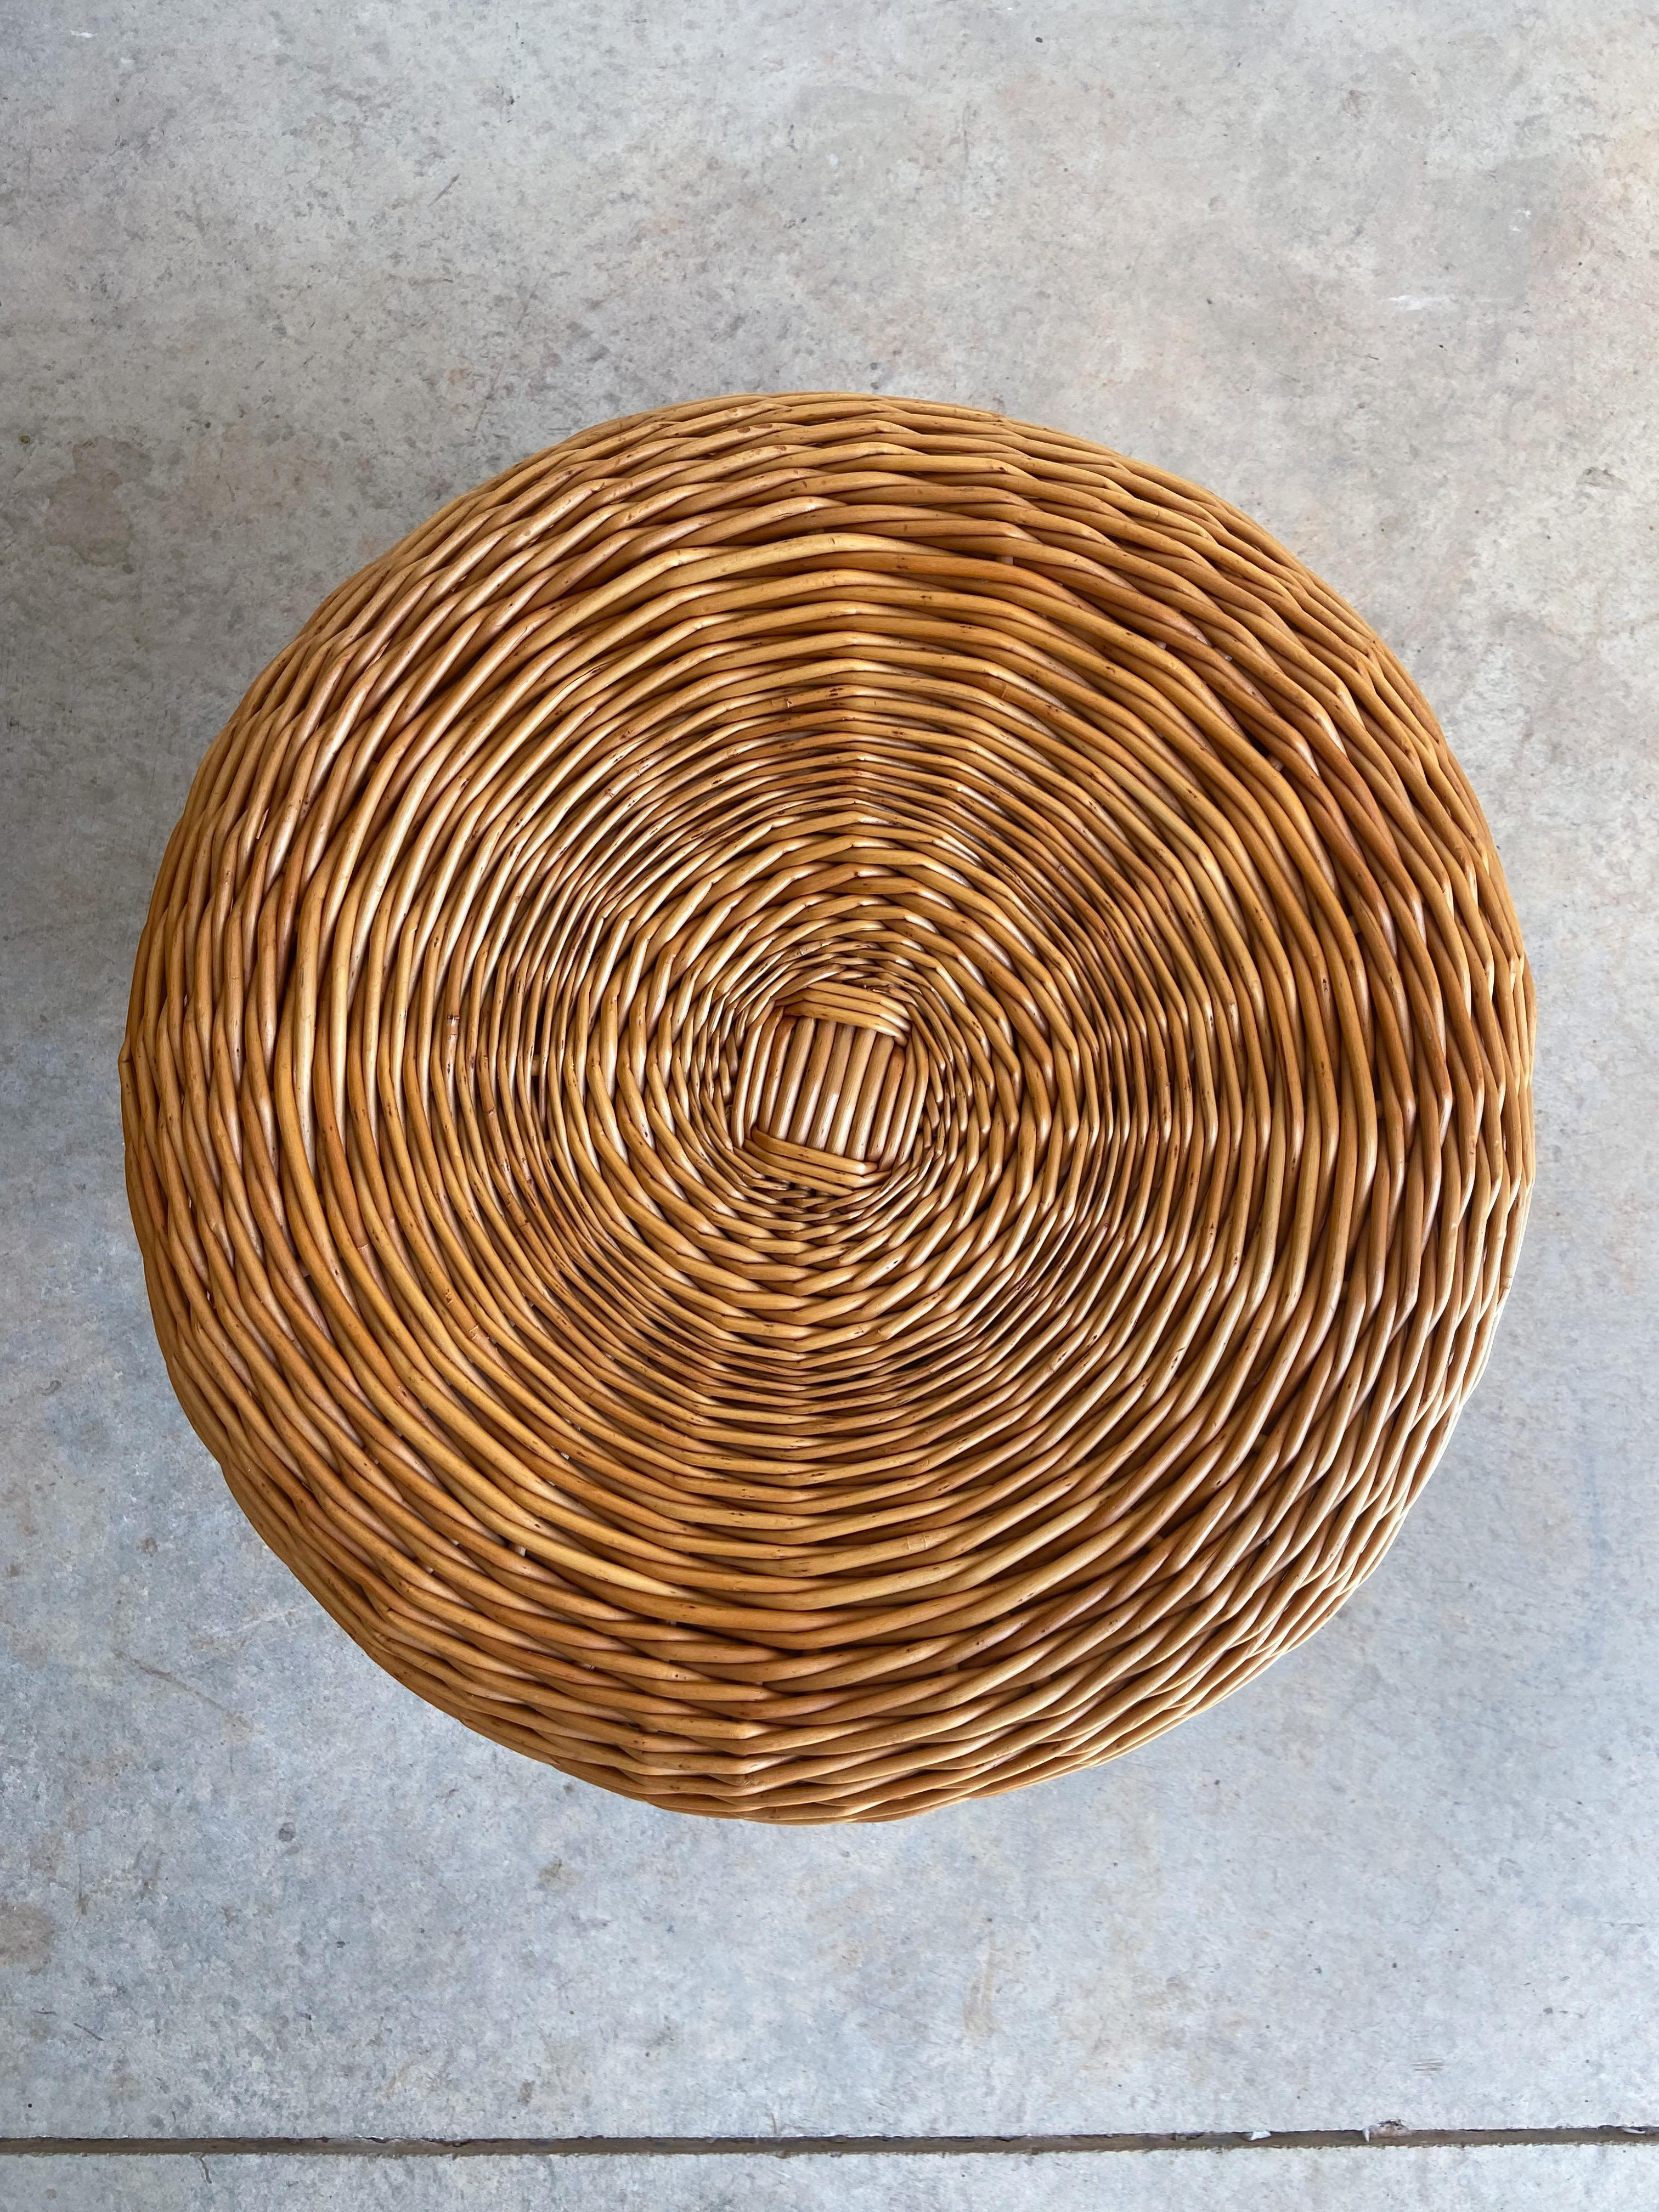 Hand-Crafted Large Rattan and Wood Stool Attributed to Tony Paul, 1960 For Sale